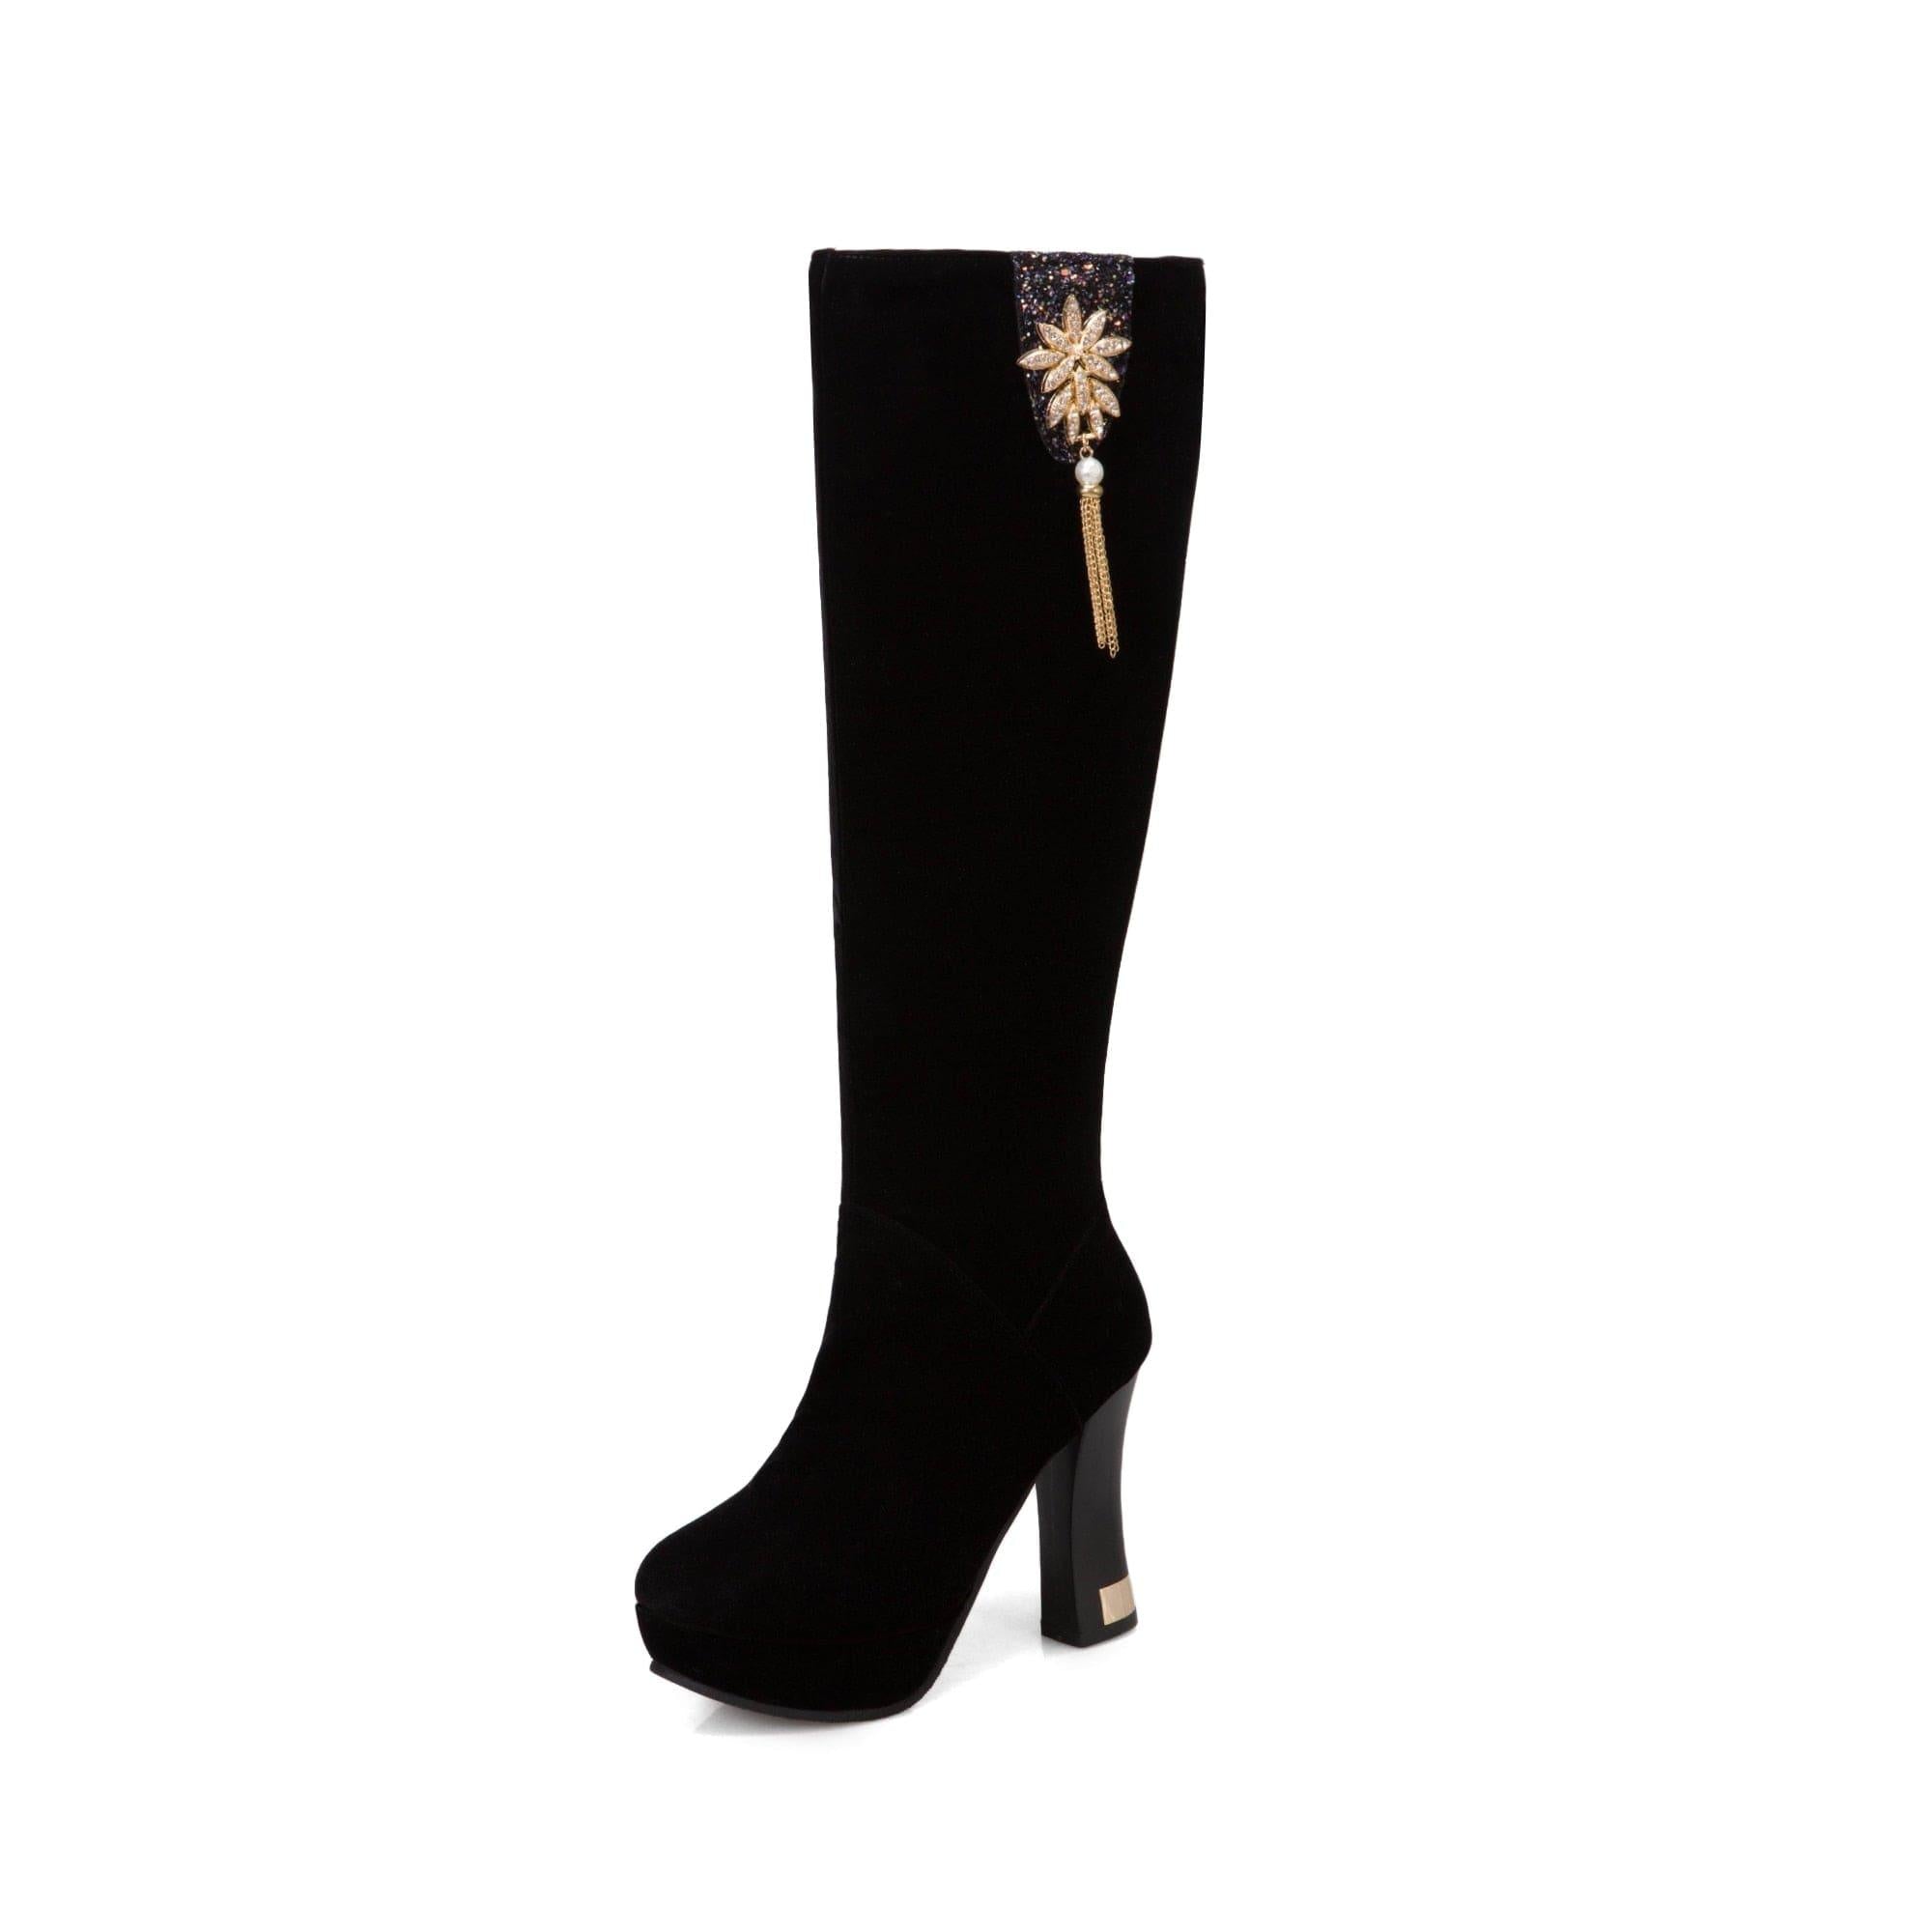 Autumn Luxury Knee High Boots For Women - For Women USA